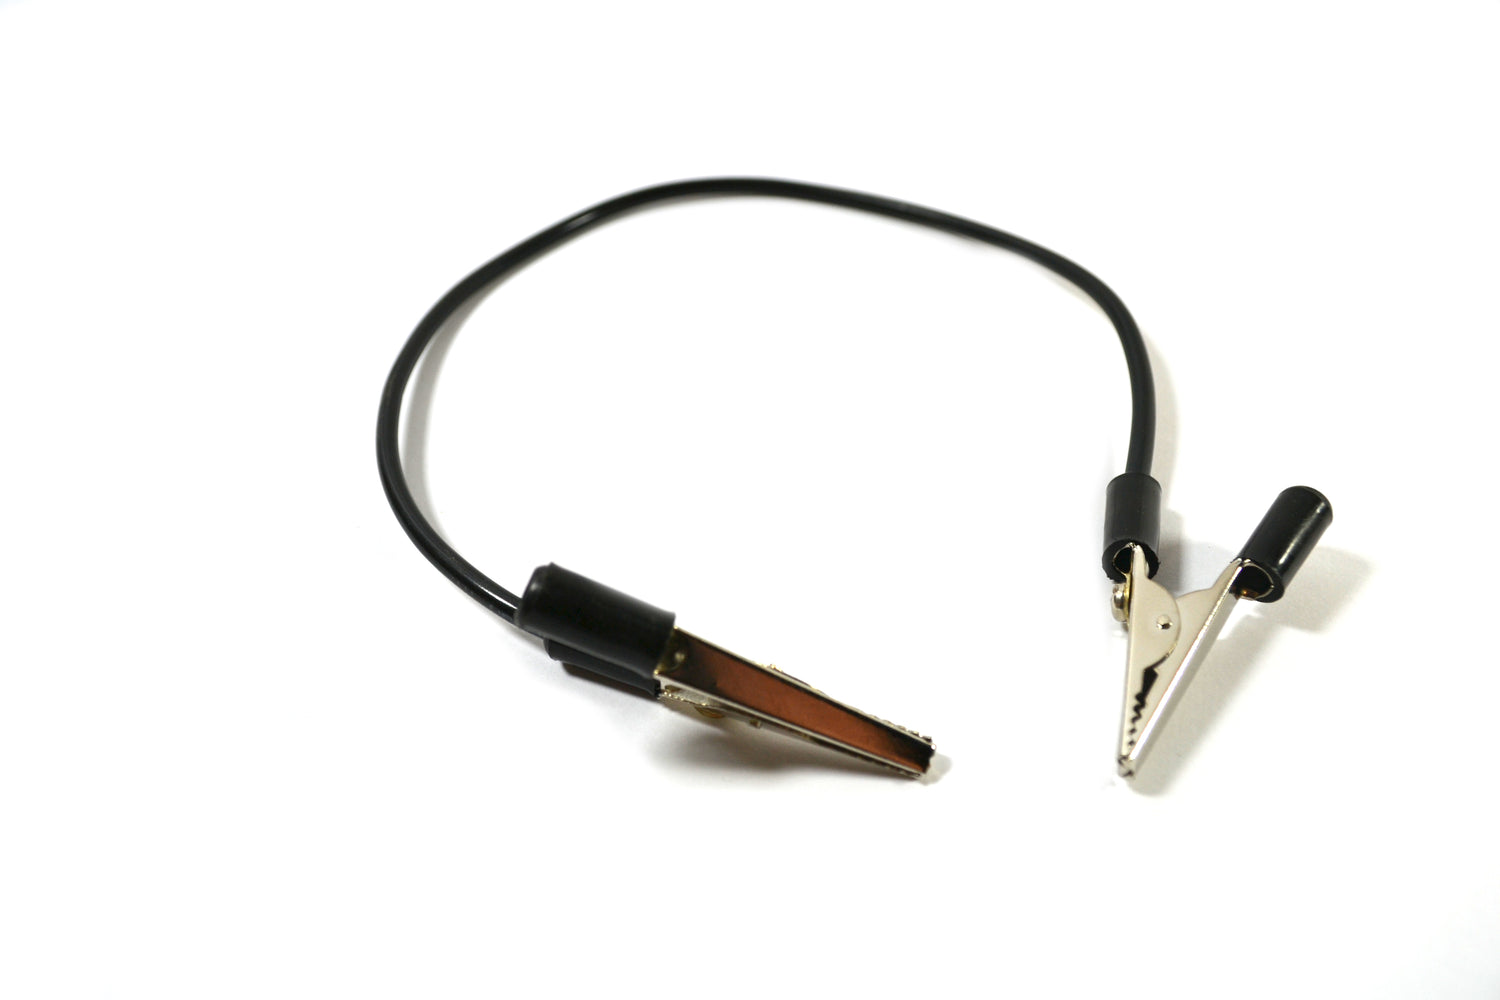 Eisco Labs Black 4mm Connecting Leads - Alligator Clips - 300mm Length